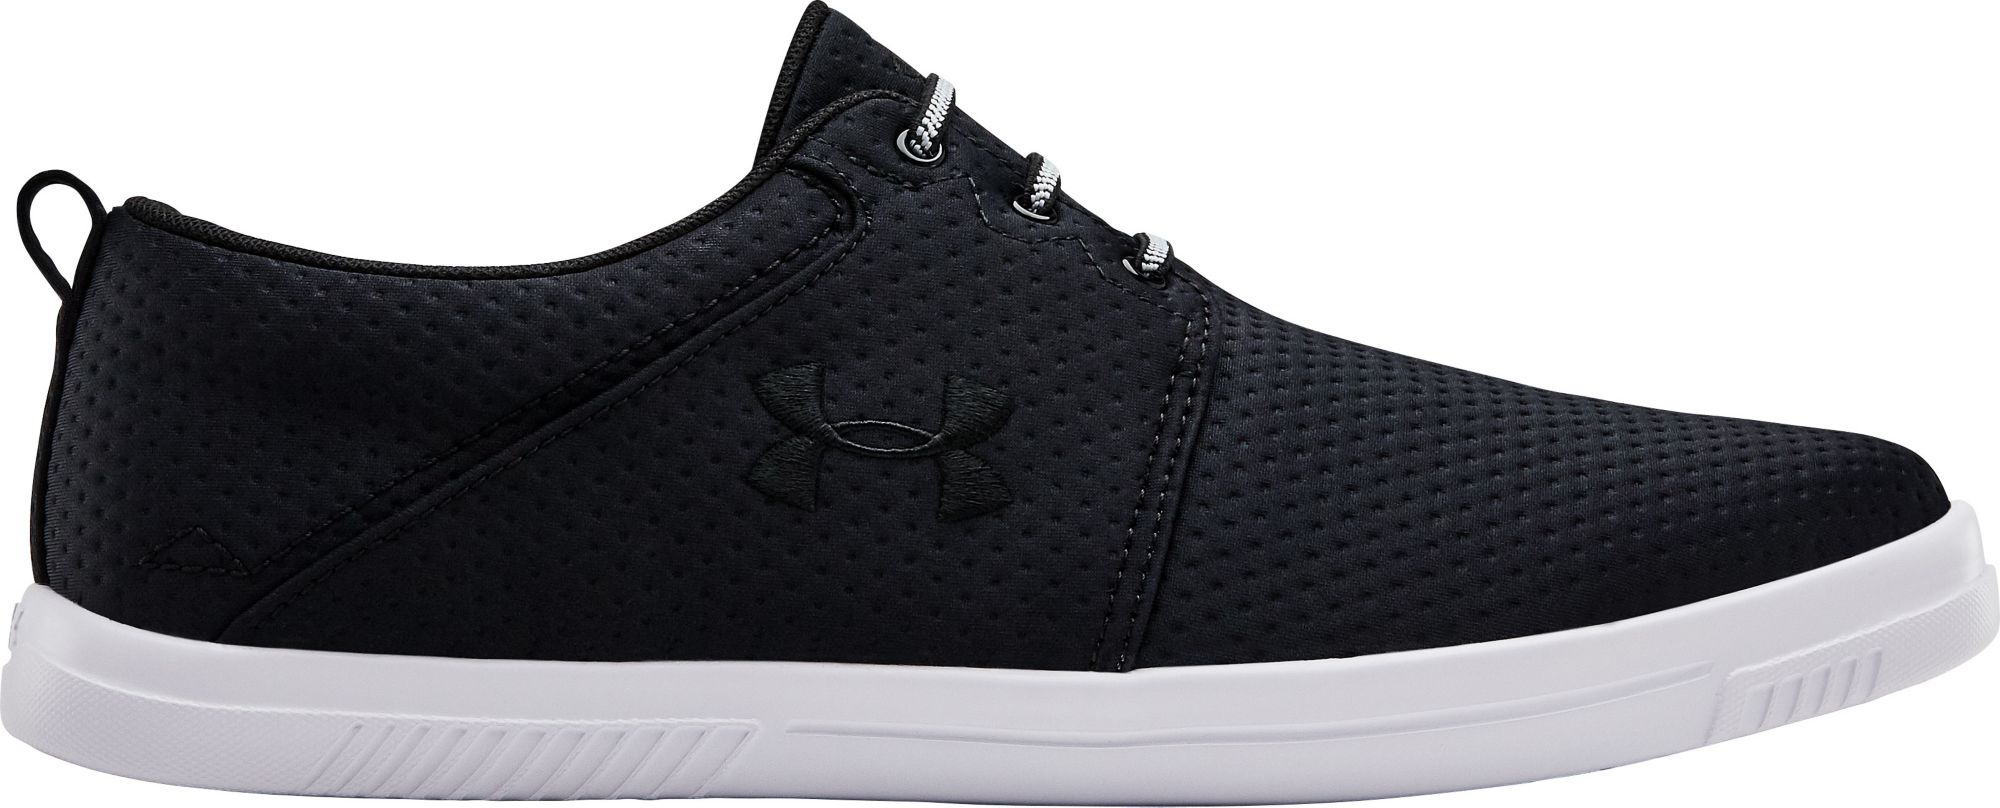 under armour women's street encounter recovery shoes